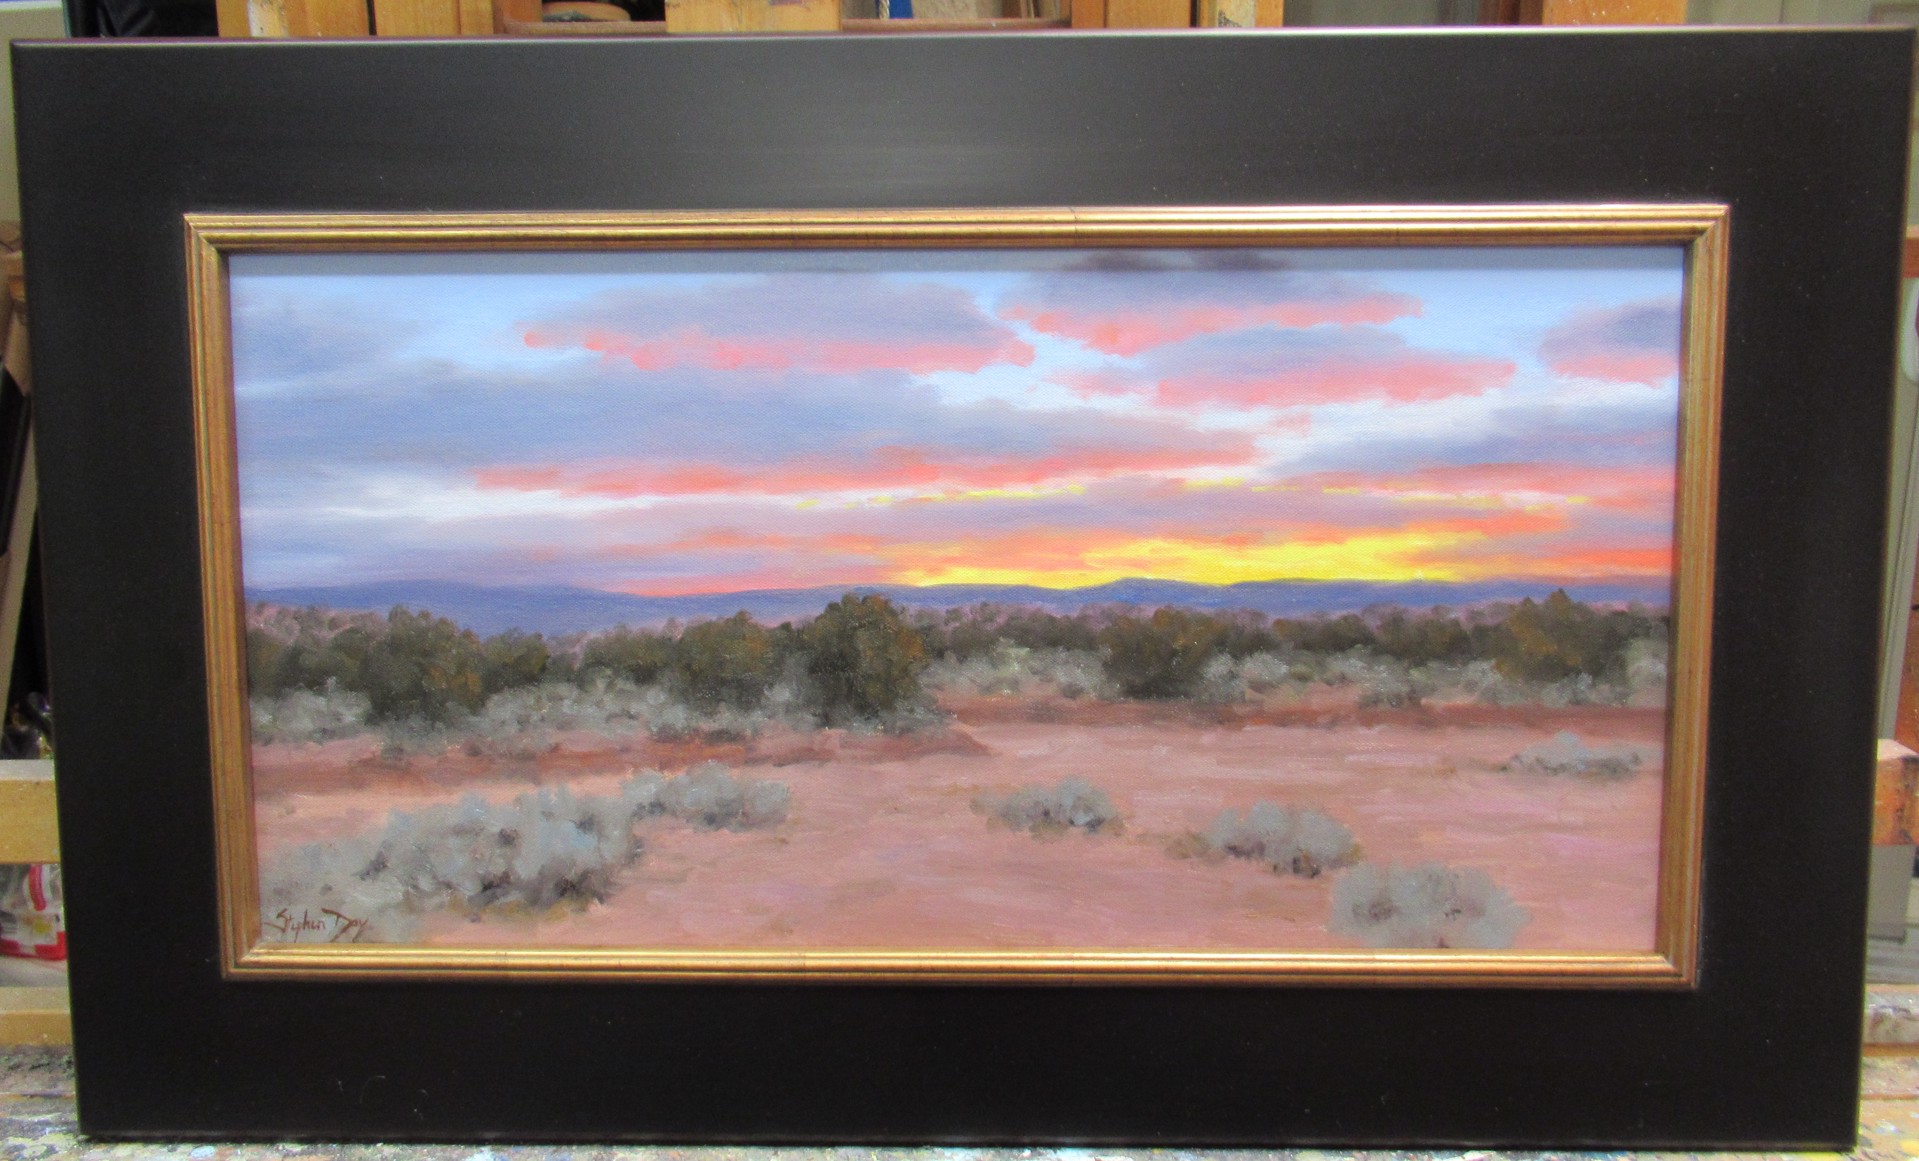 Evening Over New Mexico by Stephen Day